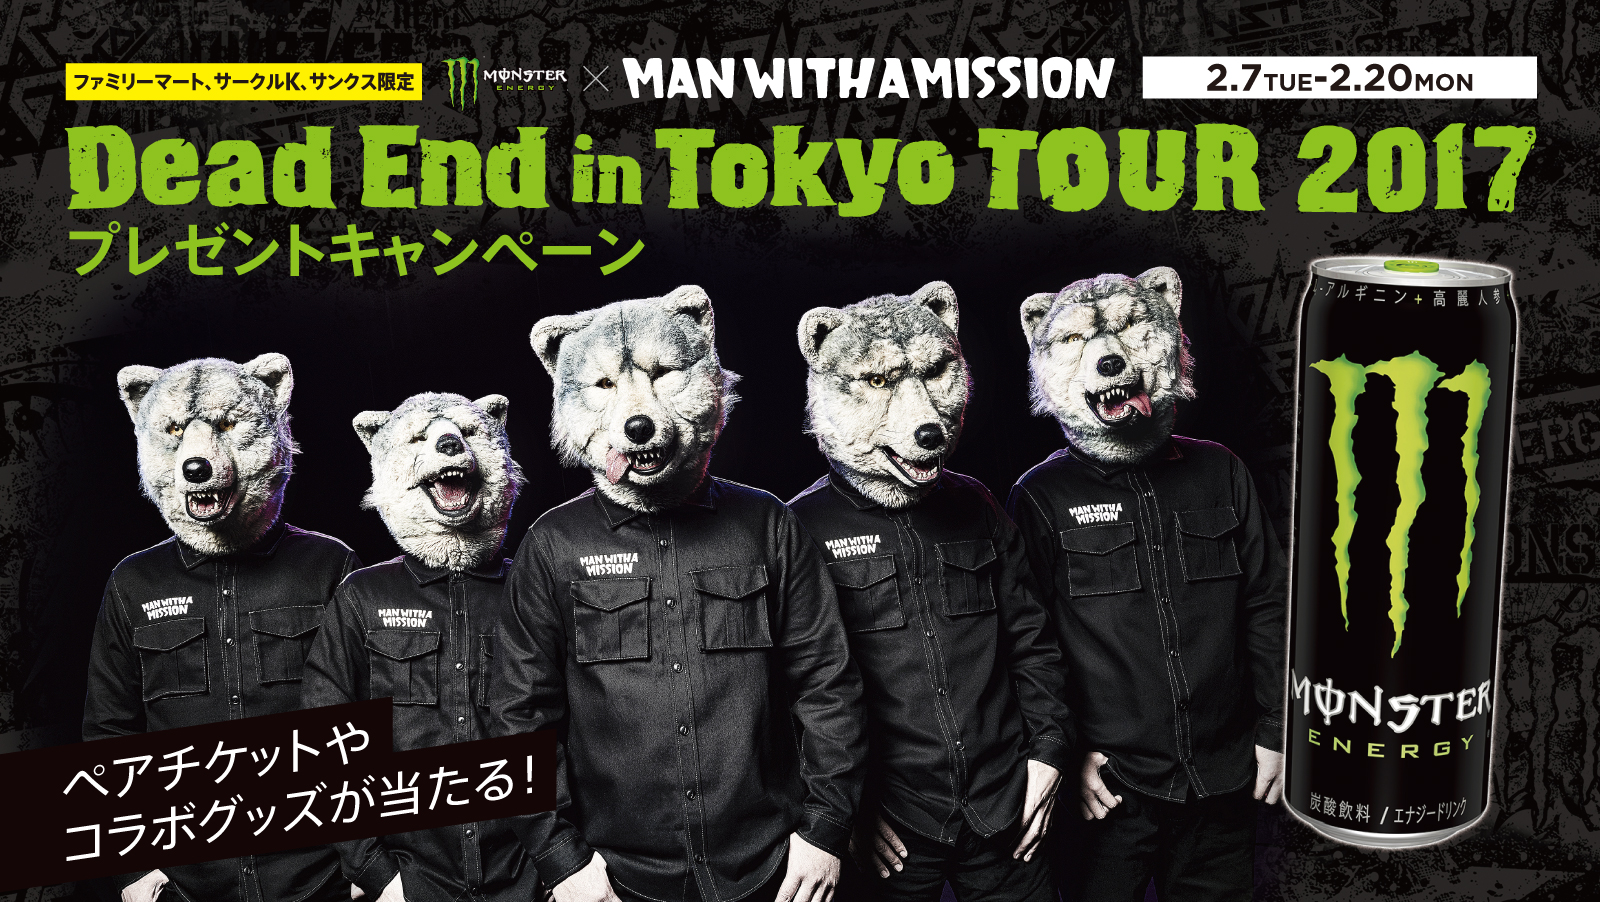 Monster Energy X Man With A Mission Dead End In Tokyo Tour 17 プレゼントキャンペーン開催 モンスターエナジージャパン合同会社のプレスリリース